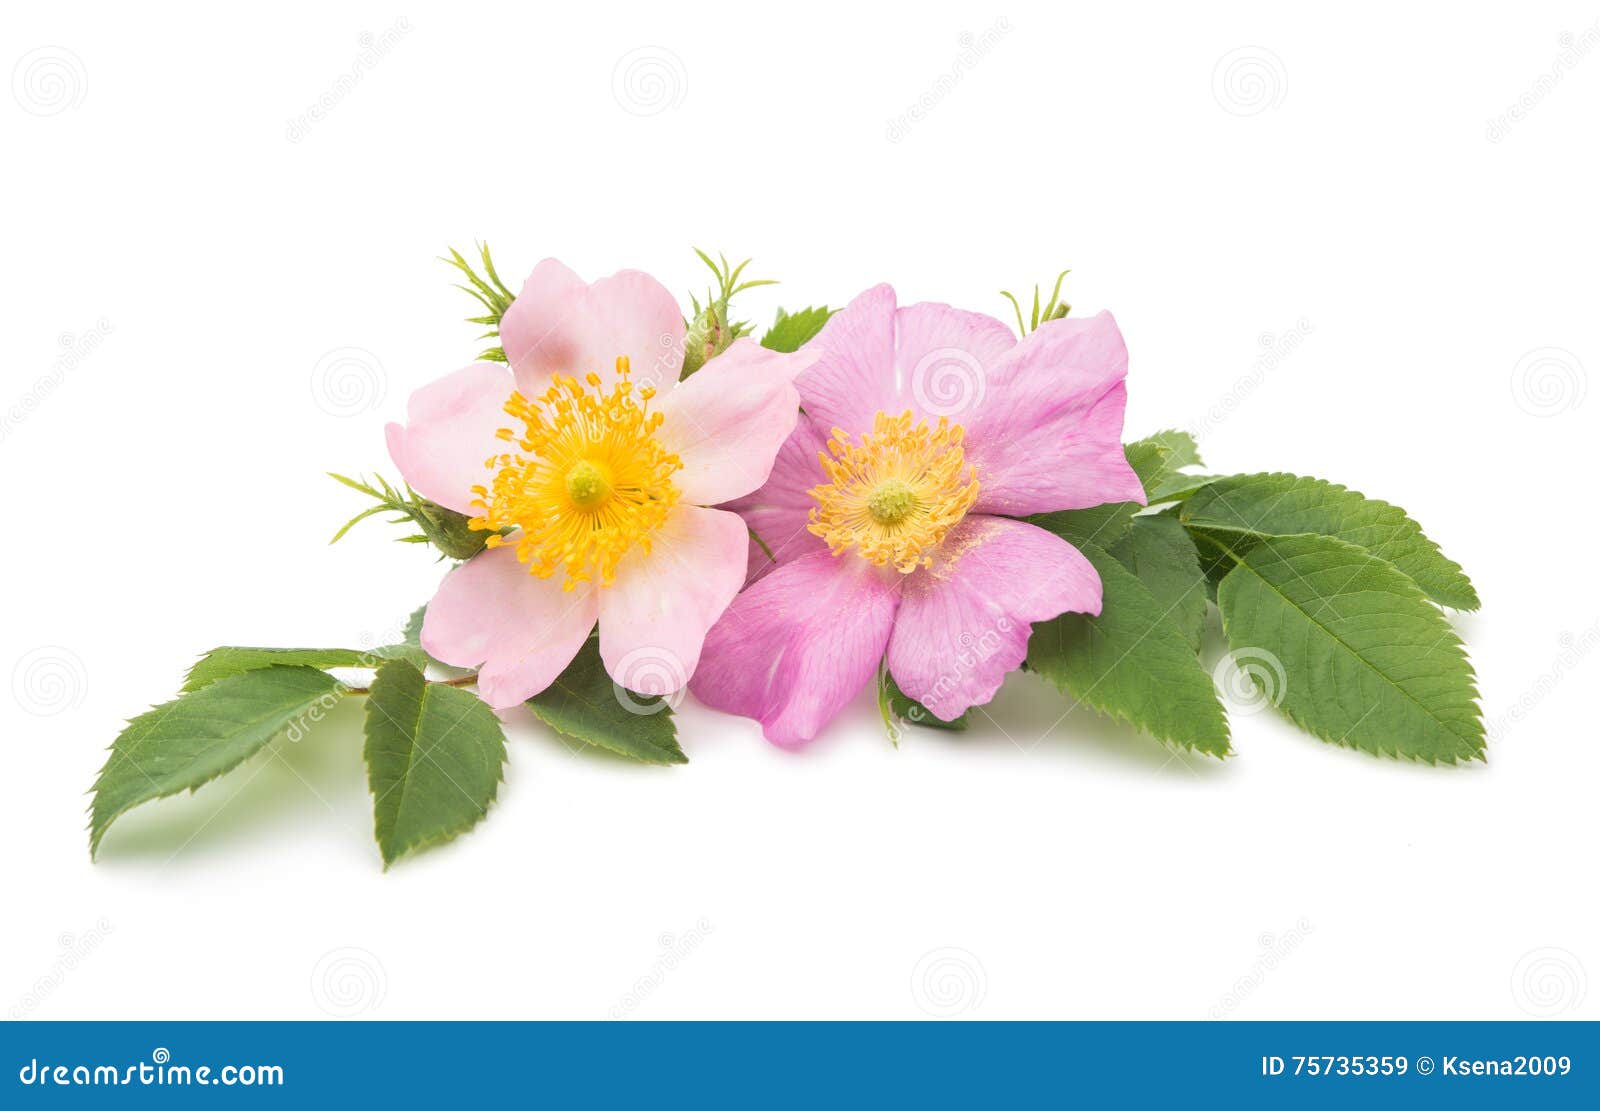 Wild rose stock image. Image of nature, green, harvest - 75735359